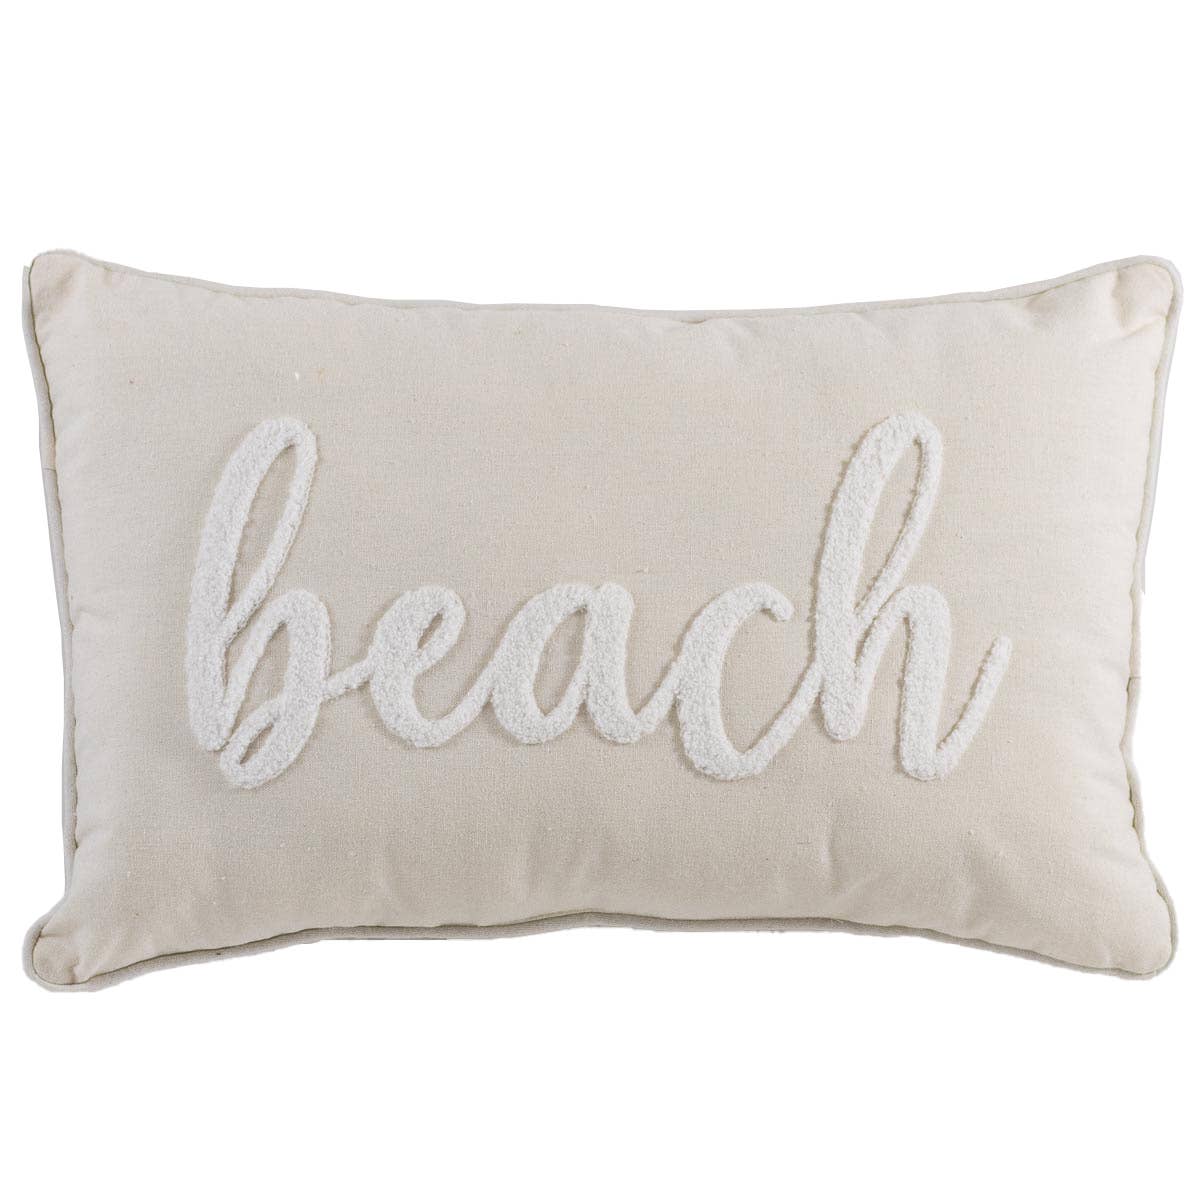 The Royal Standard - Beach Embroidered Pillow   Soft White/White   13x20